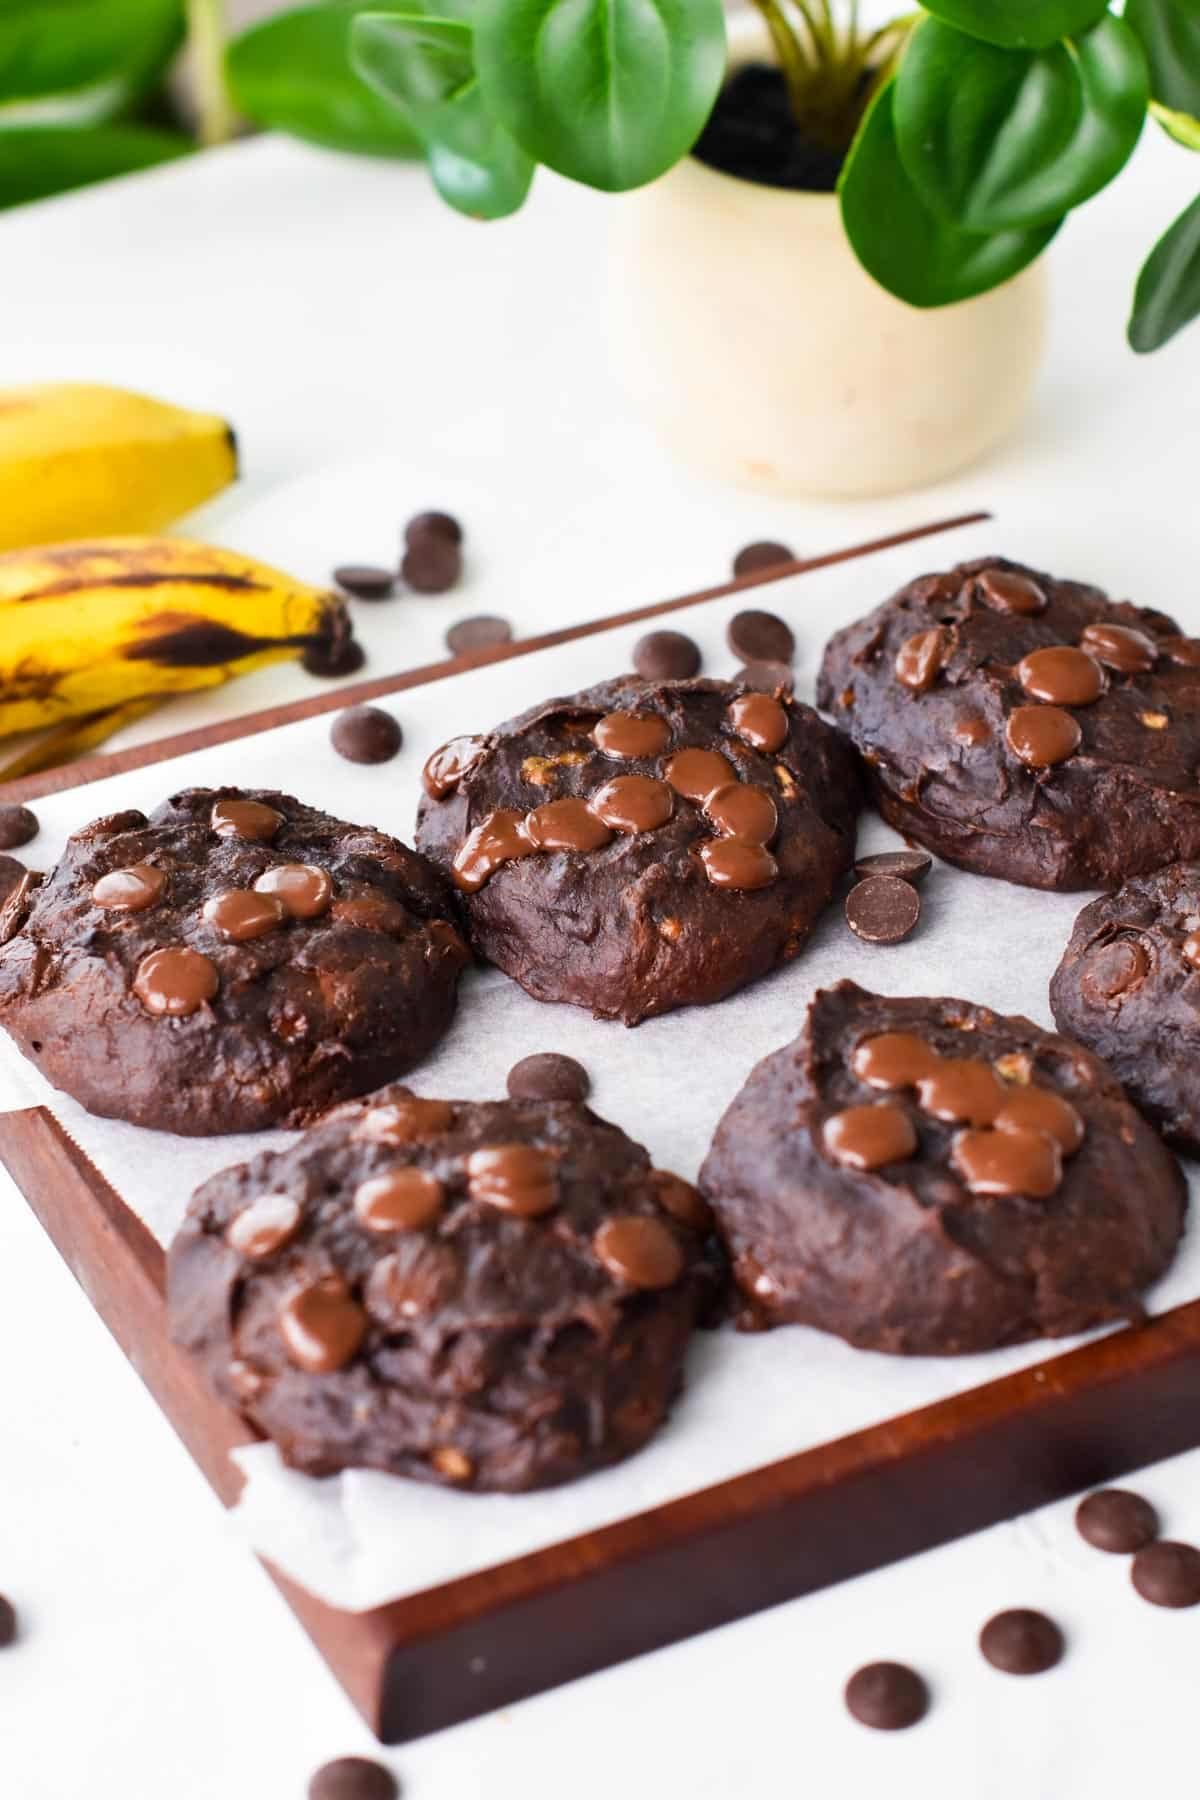 Six Chocolate Banana Cookies next to each other on a chopping board covered with white parchment paper.